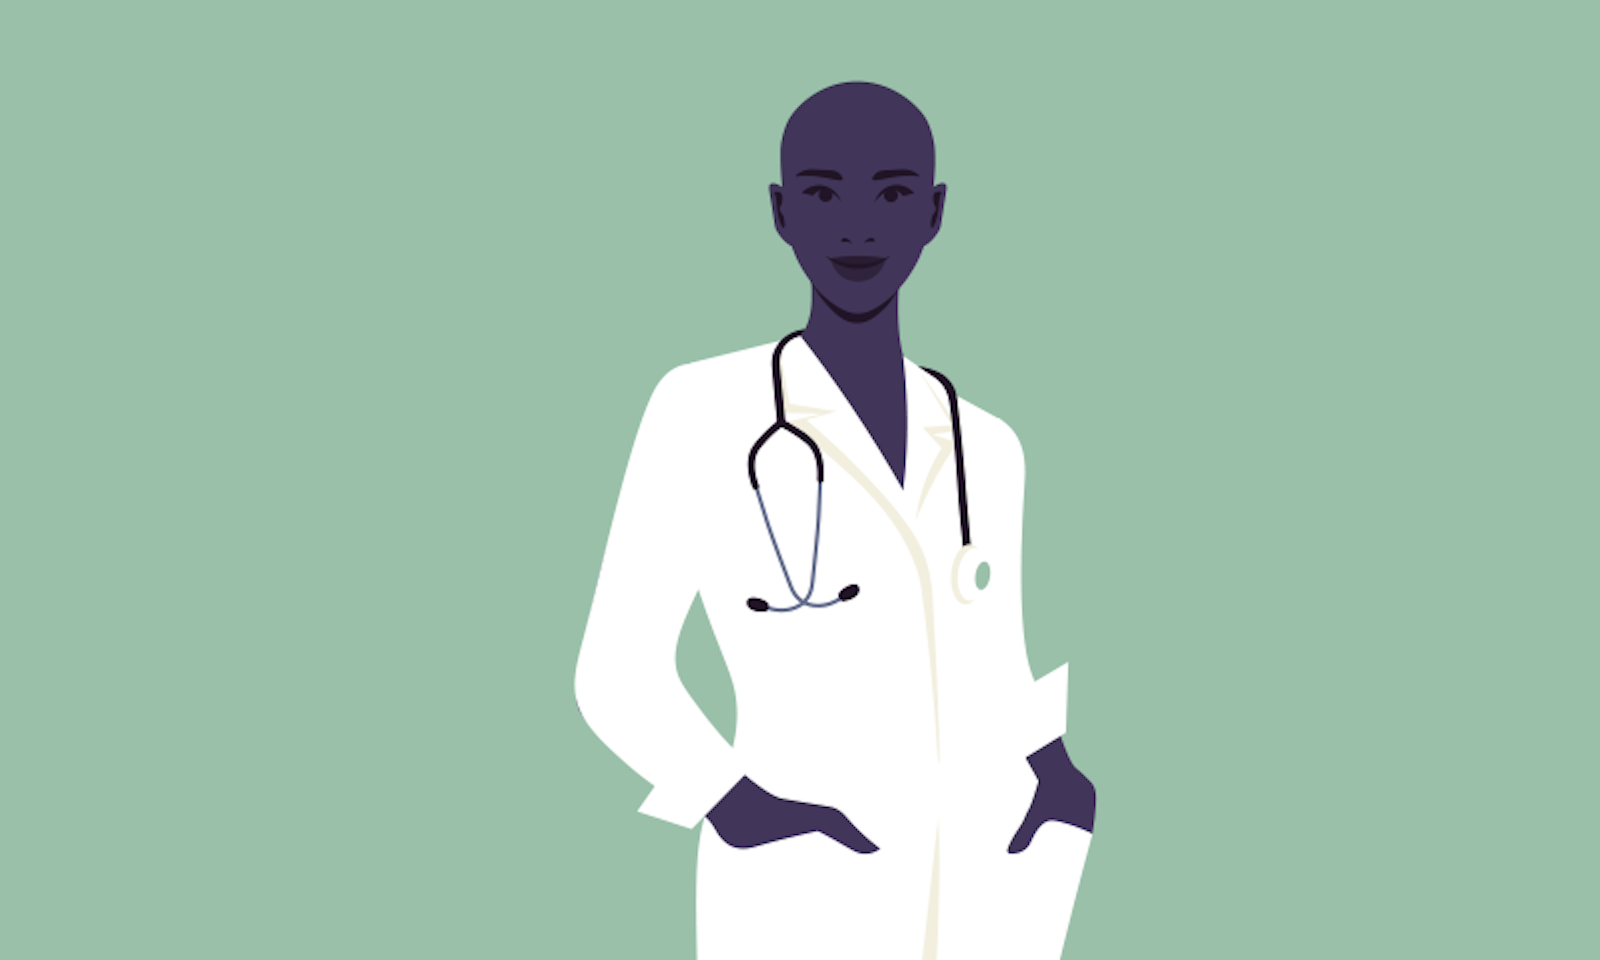 african american female doctor